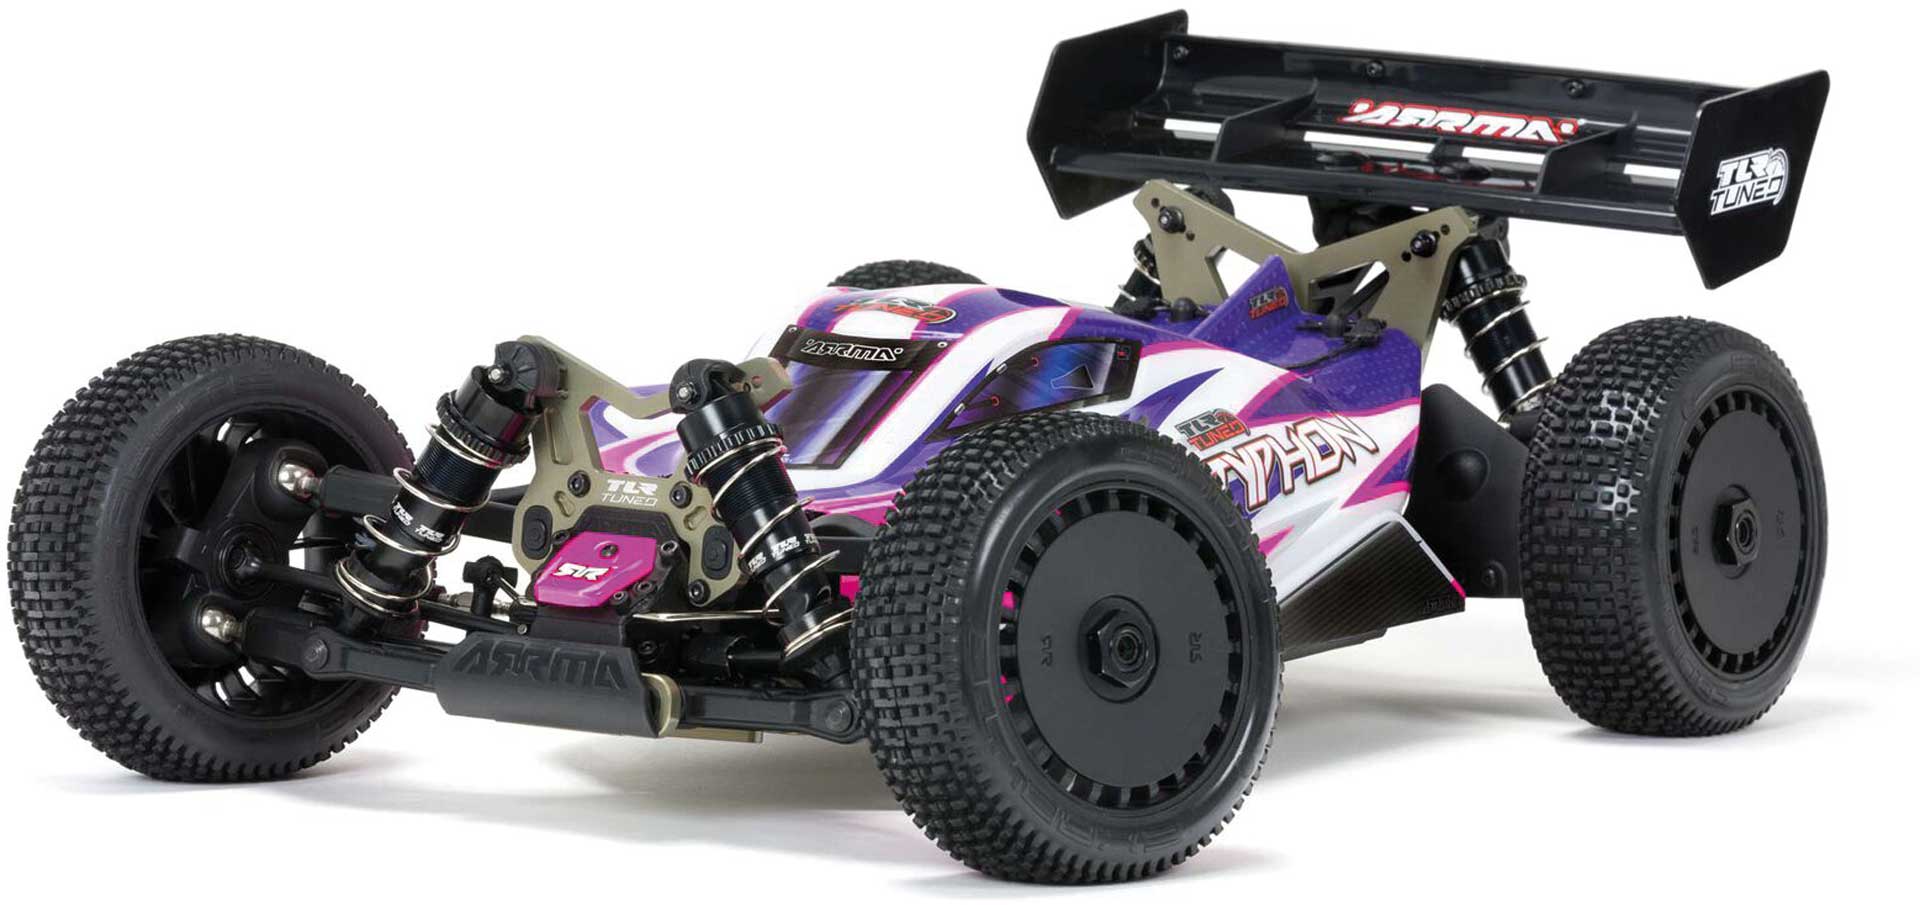 ARRMA 1/8 TLR Tuned TYPHON 4X4 Roller Buggy, Pink/Purple